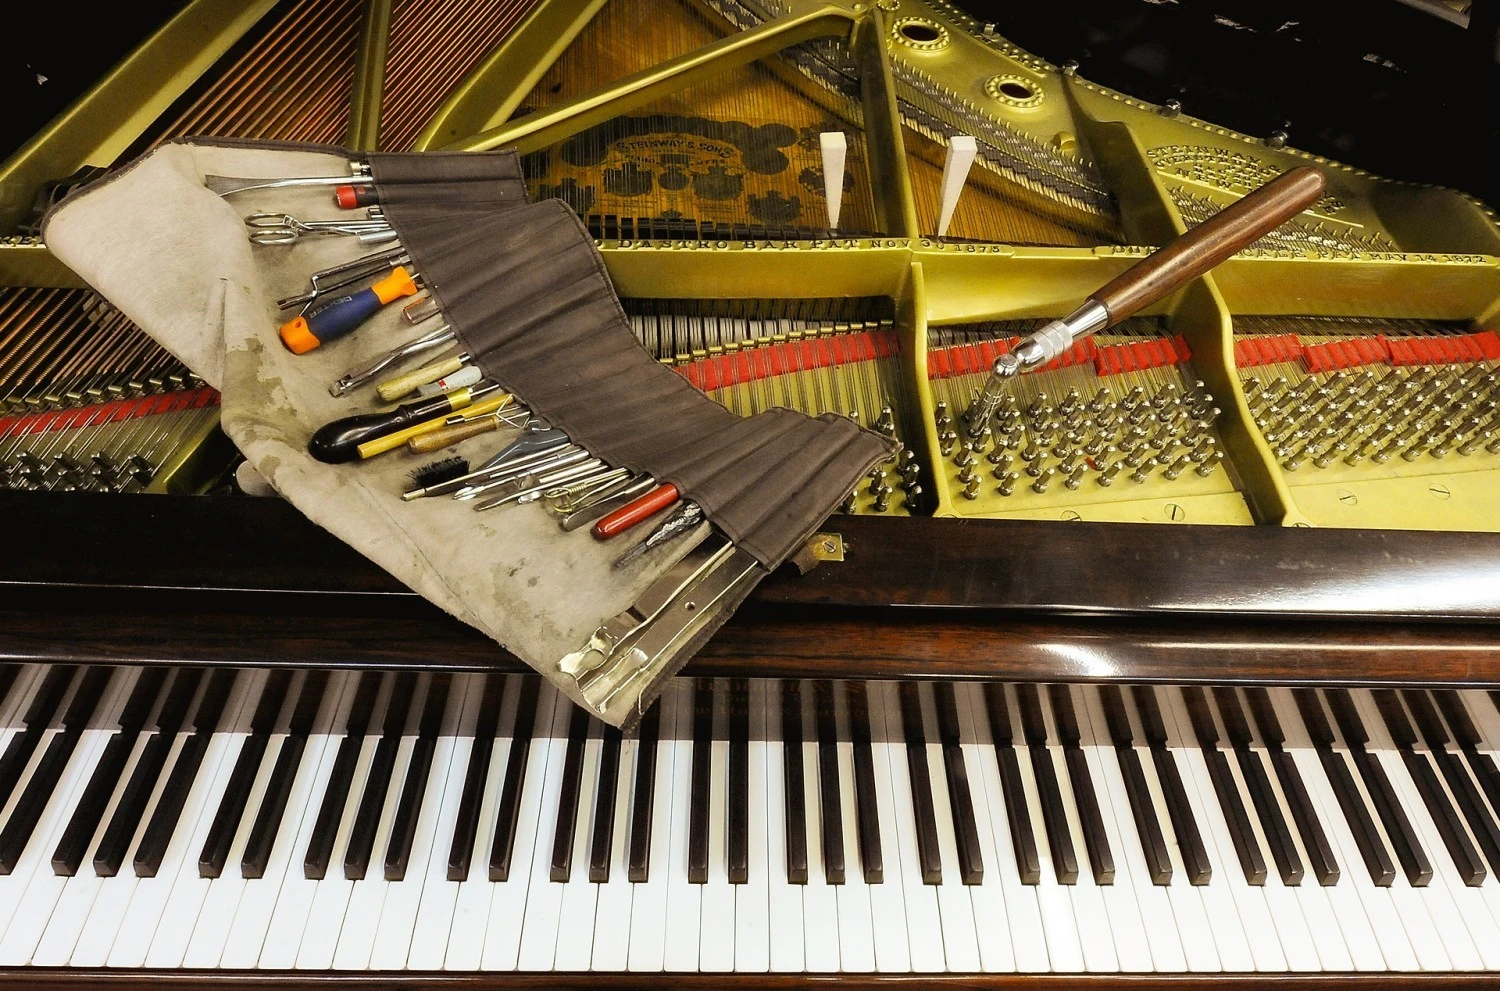 The Best Piano Repair Services and Music Stores in Australia According To Piano Movers